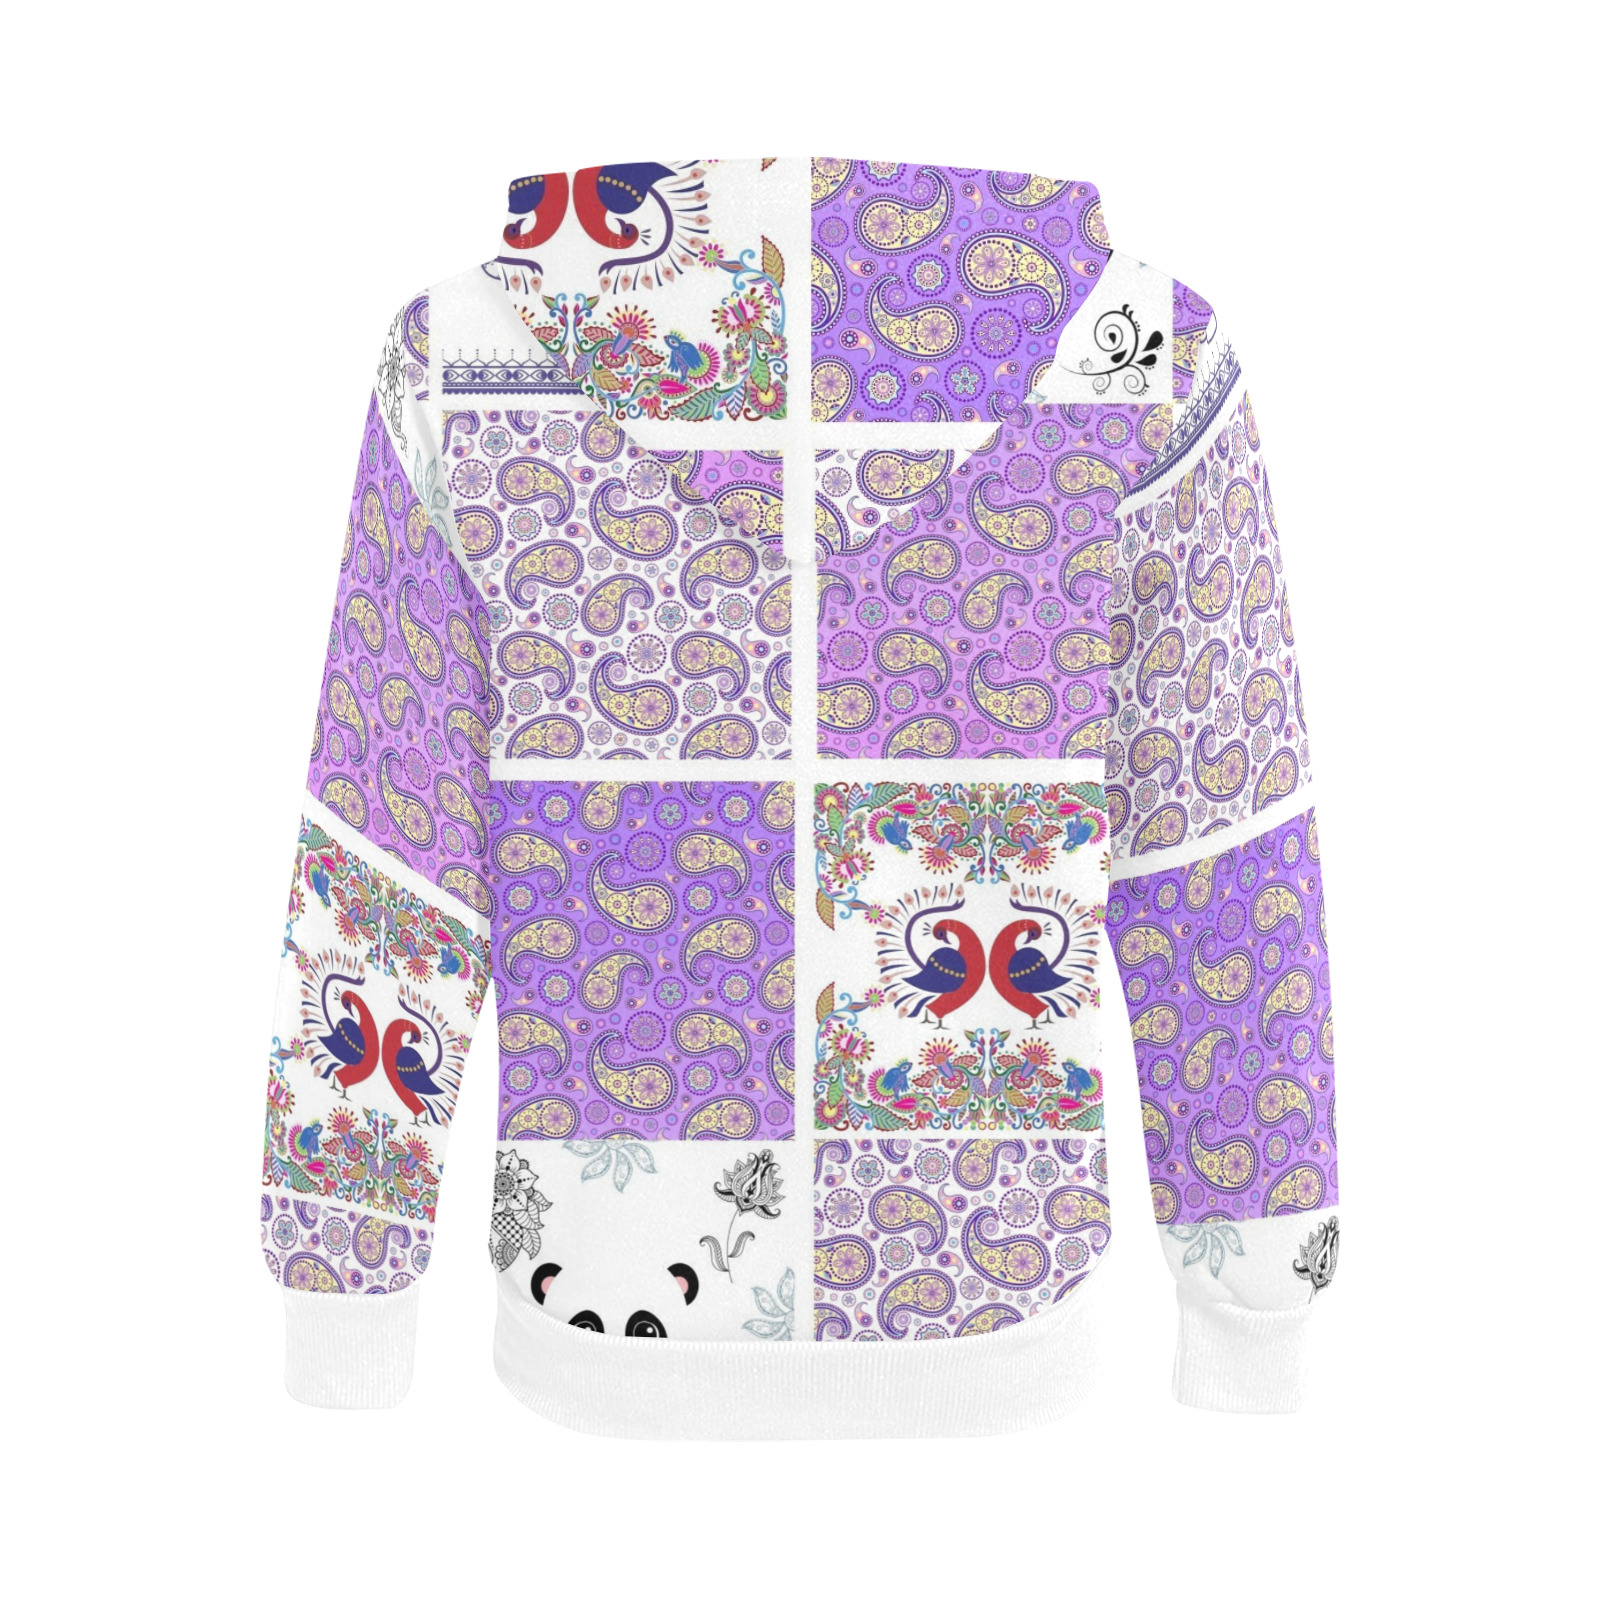 Purple Paisley Birds and Animals Patchwork Design Kids' All Over Print Full Zip Hoodie (Model H39)